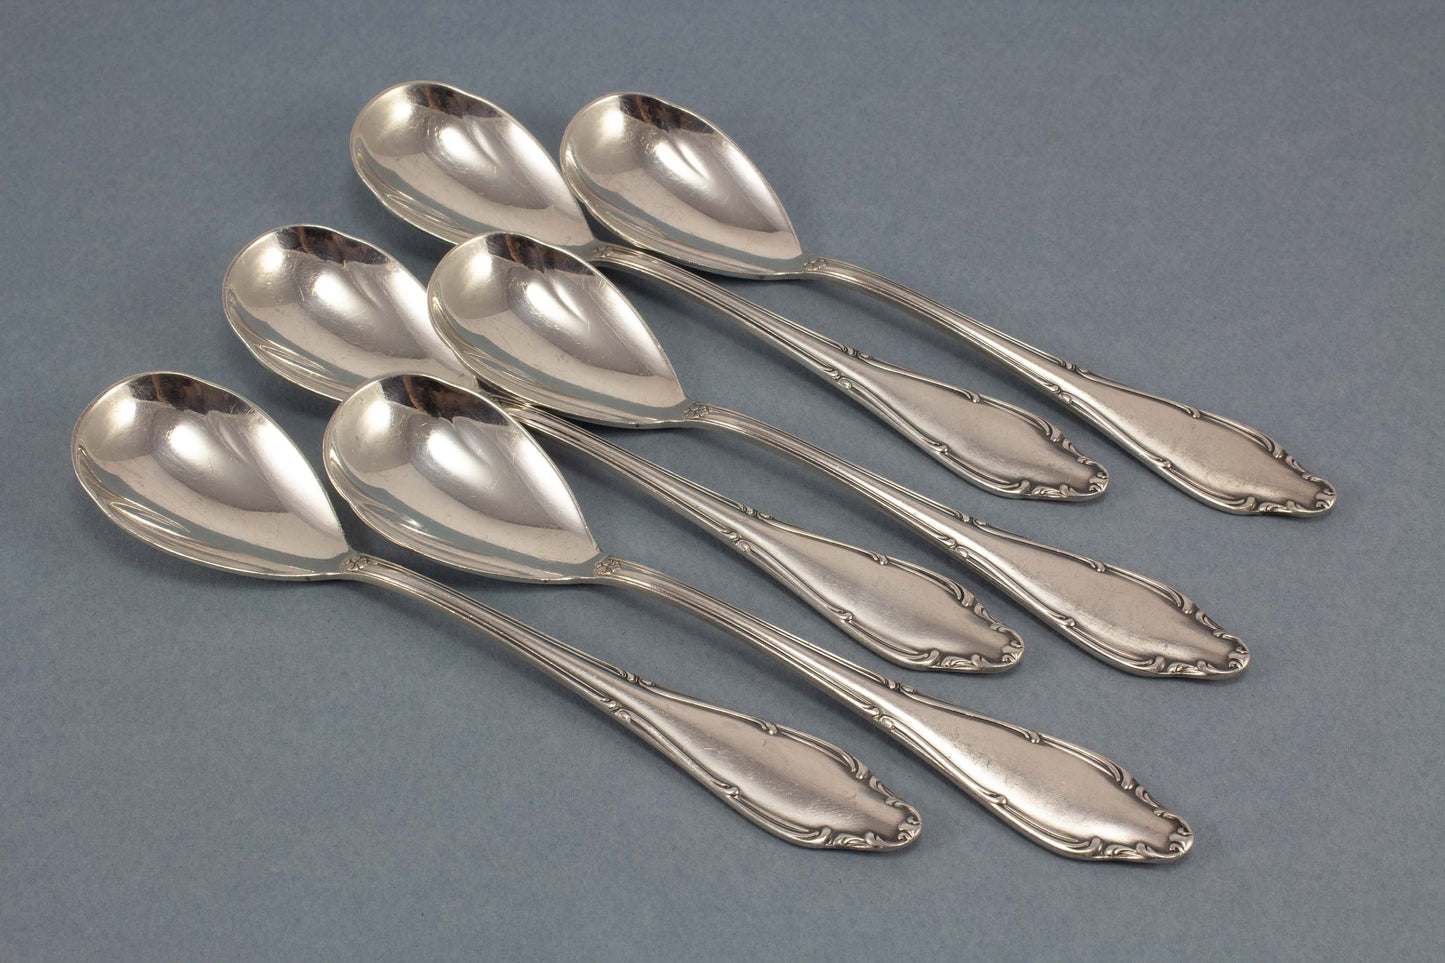 6 ice cream spoons in a box, WMF 2200, silver plated spoons, spoon for ice cream, silver plated, vintage cutlery, WMF cutlery